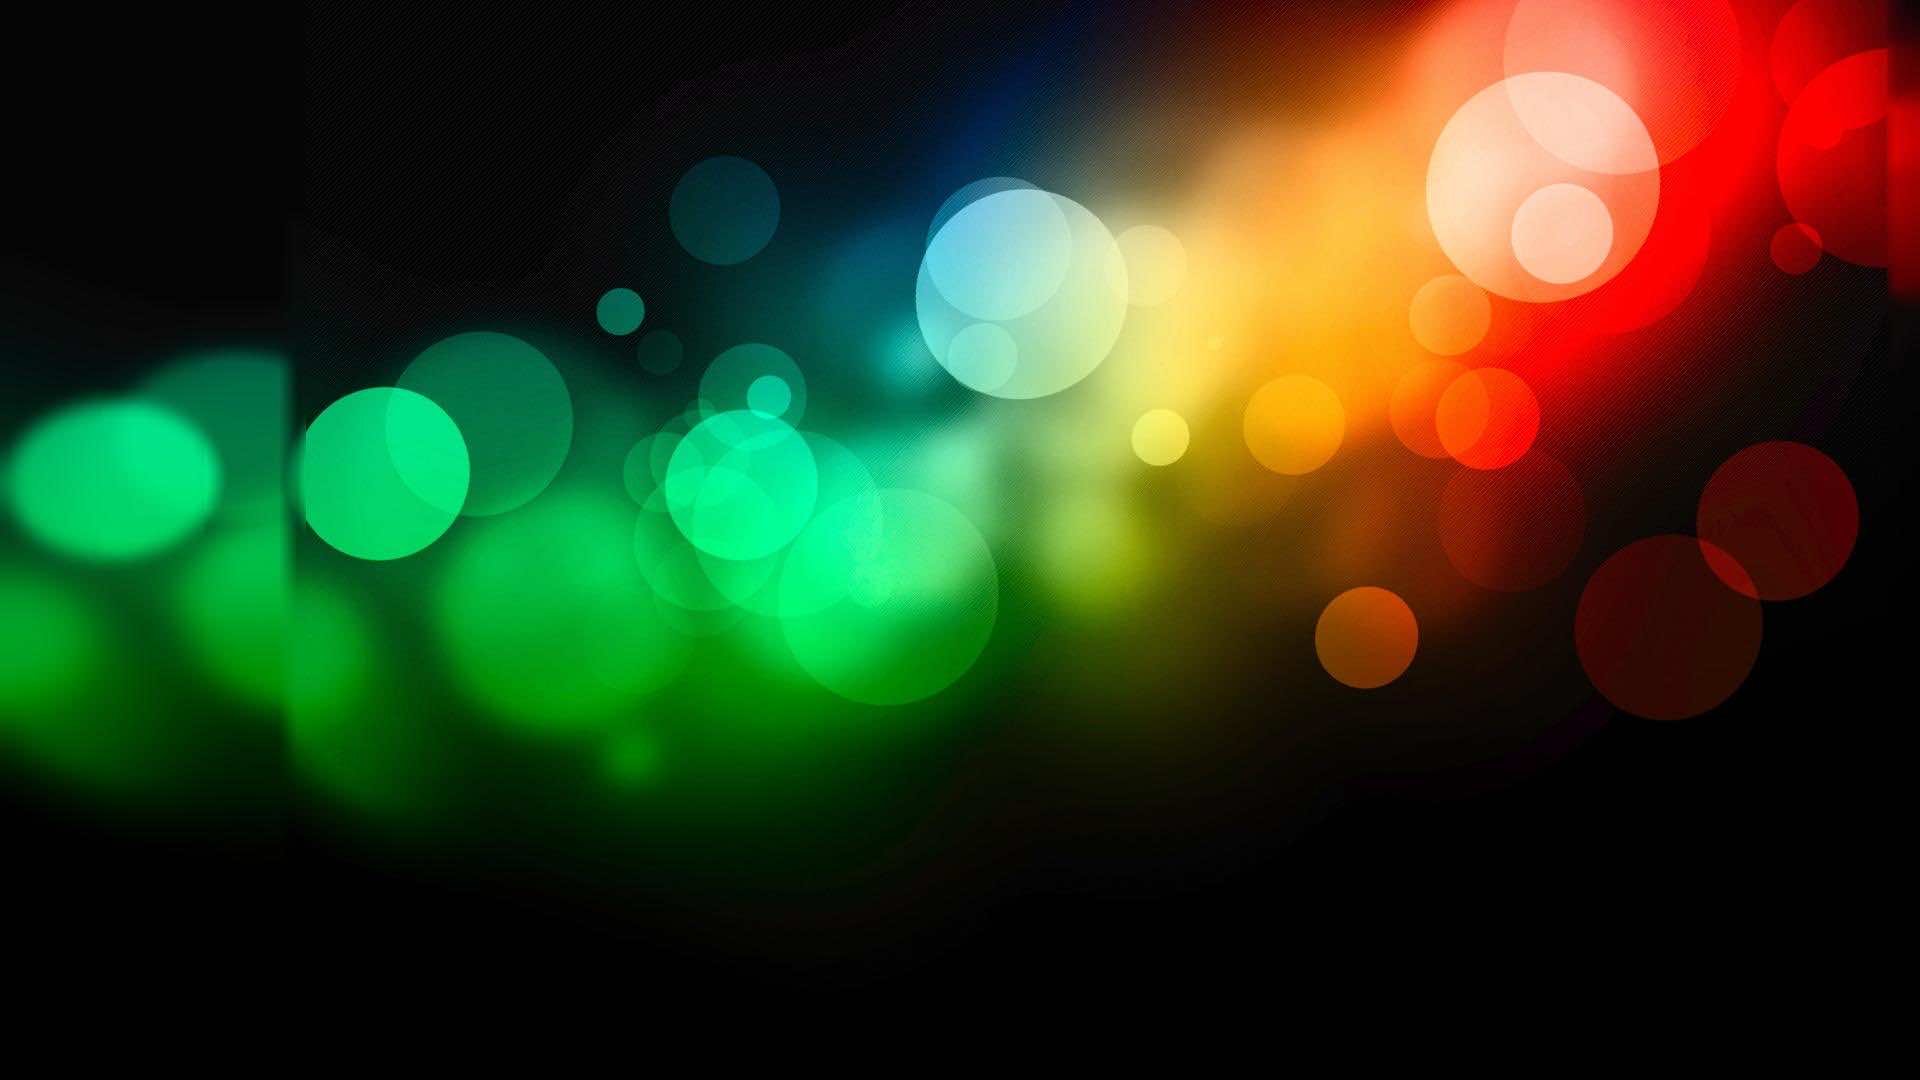 35 HD Background Wallpapers For Desktop Free Download